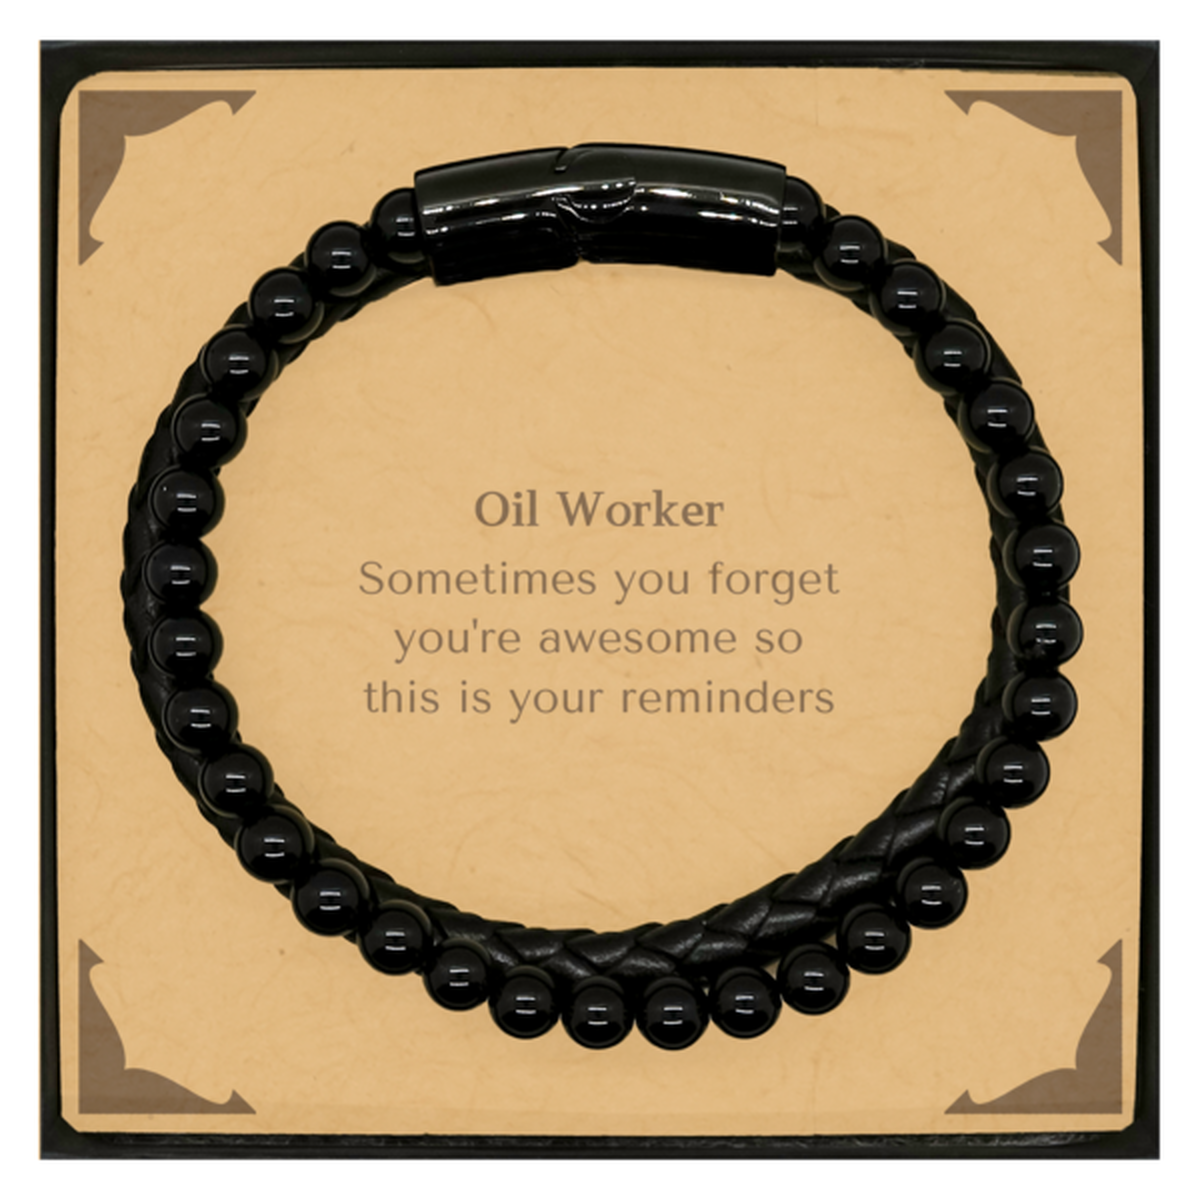 Sentimental Oil Worker Stone Leather Bracelets, Oil Worker Sometimes you forget you're awesome so this is your reminders, Graduation Christmas Birthday Gifts for Oil Worker, Men, Women, Coworkers